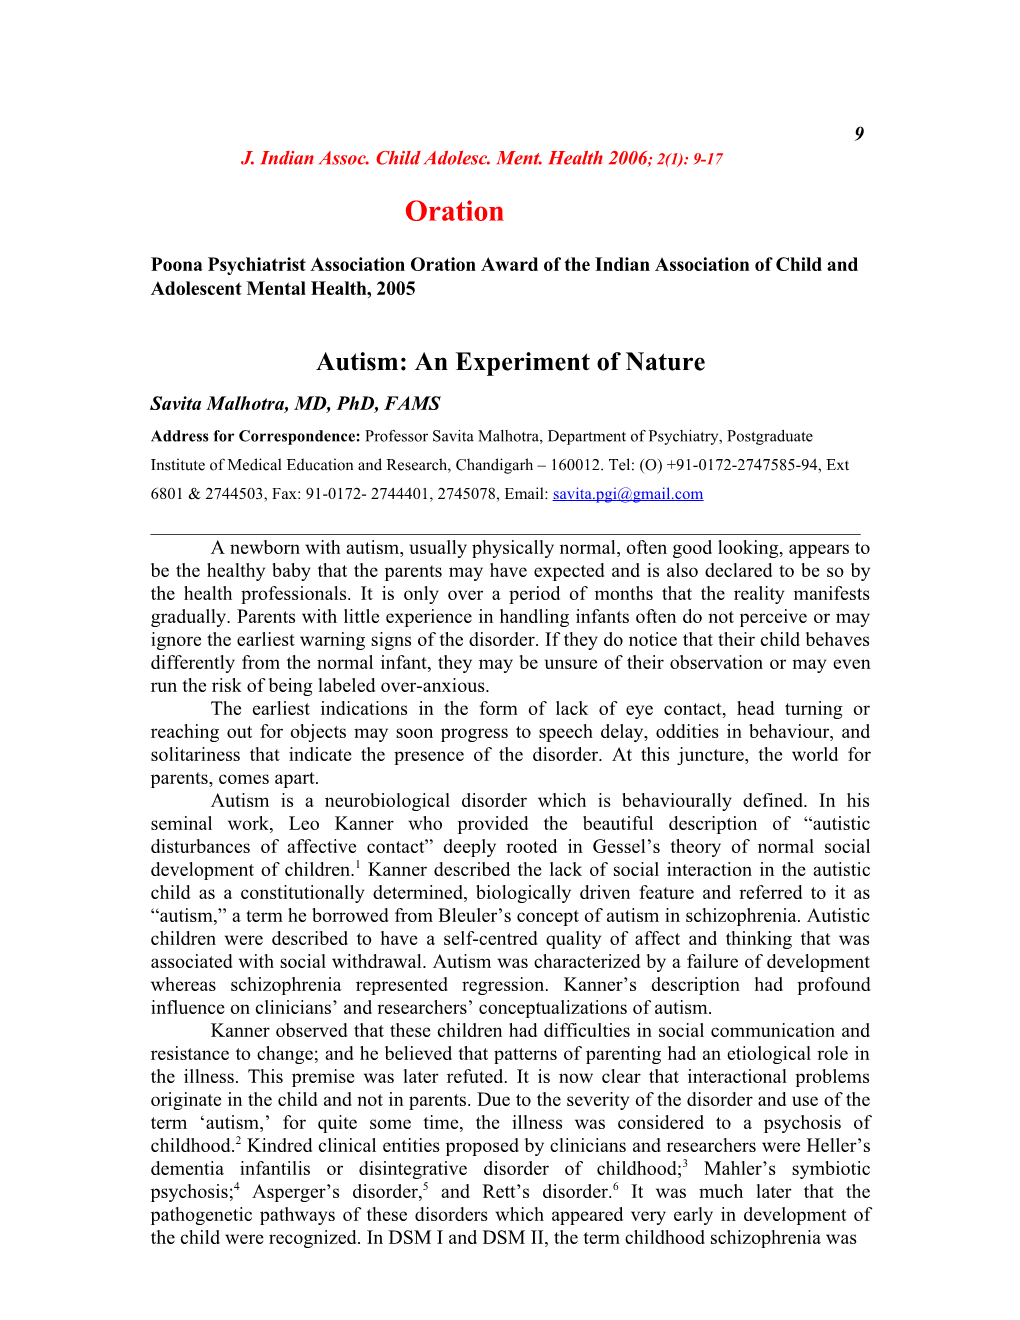 Autism: an Experiment of Nature